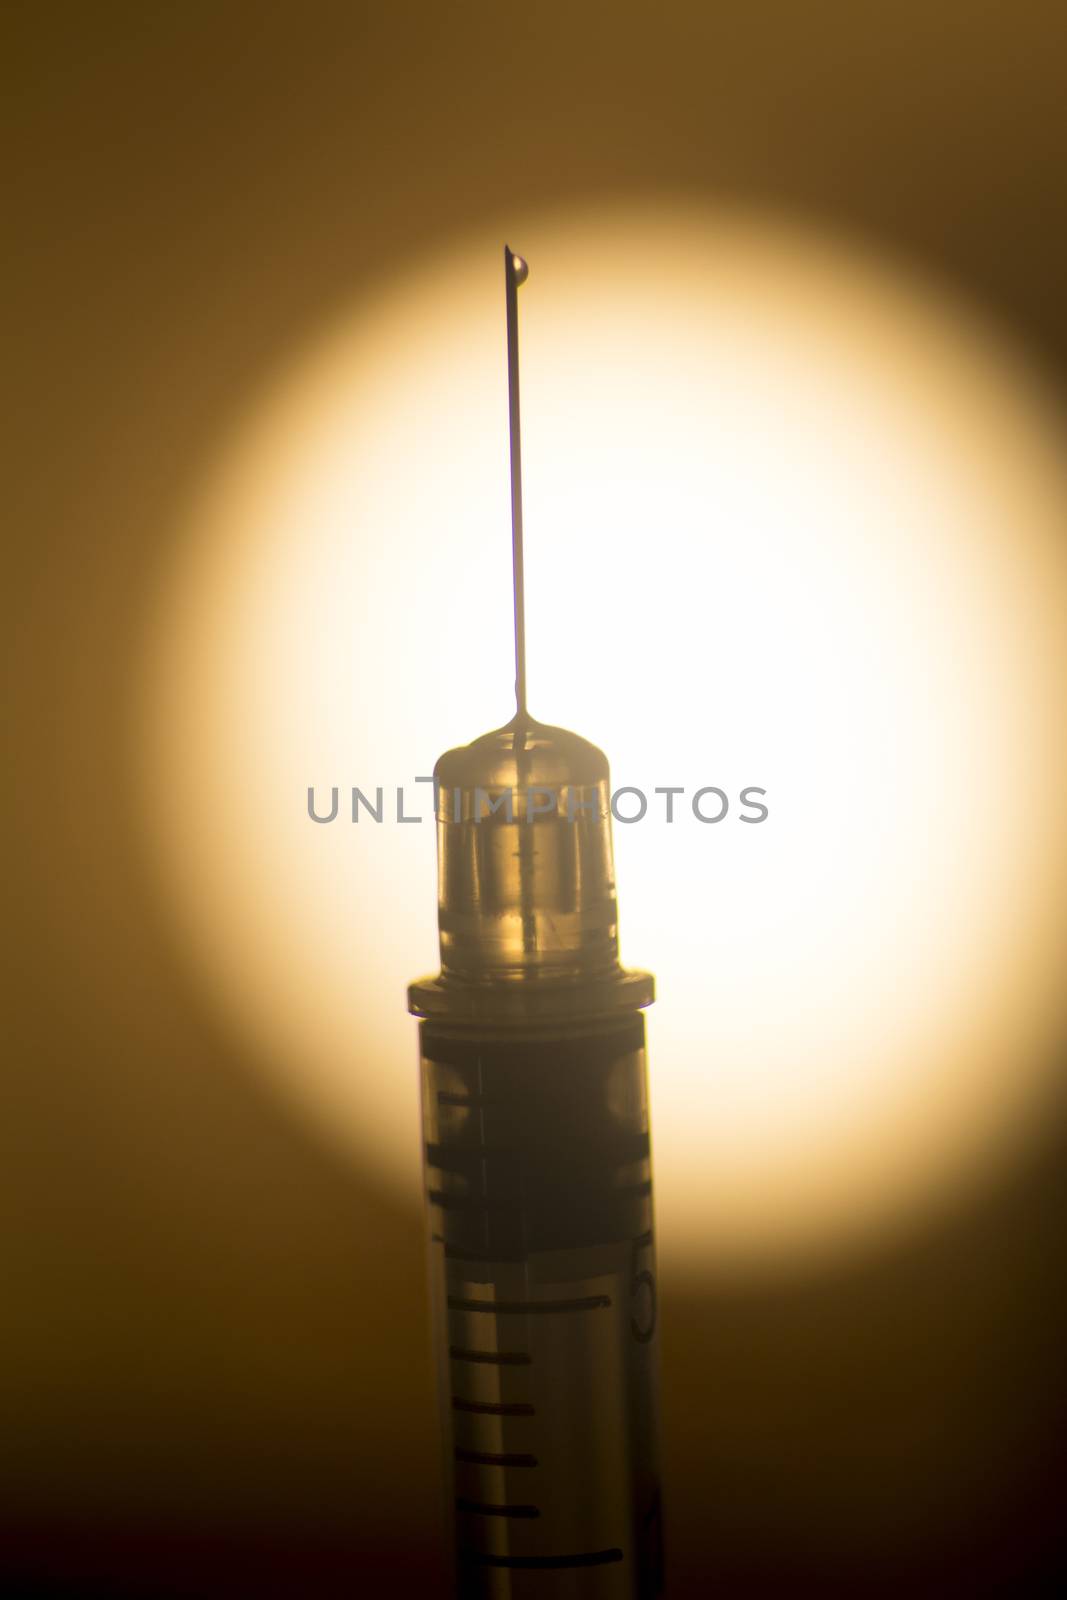 Pet cat and dog insulin injection syringe silhouette photo.